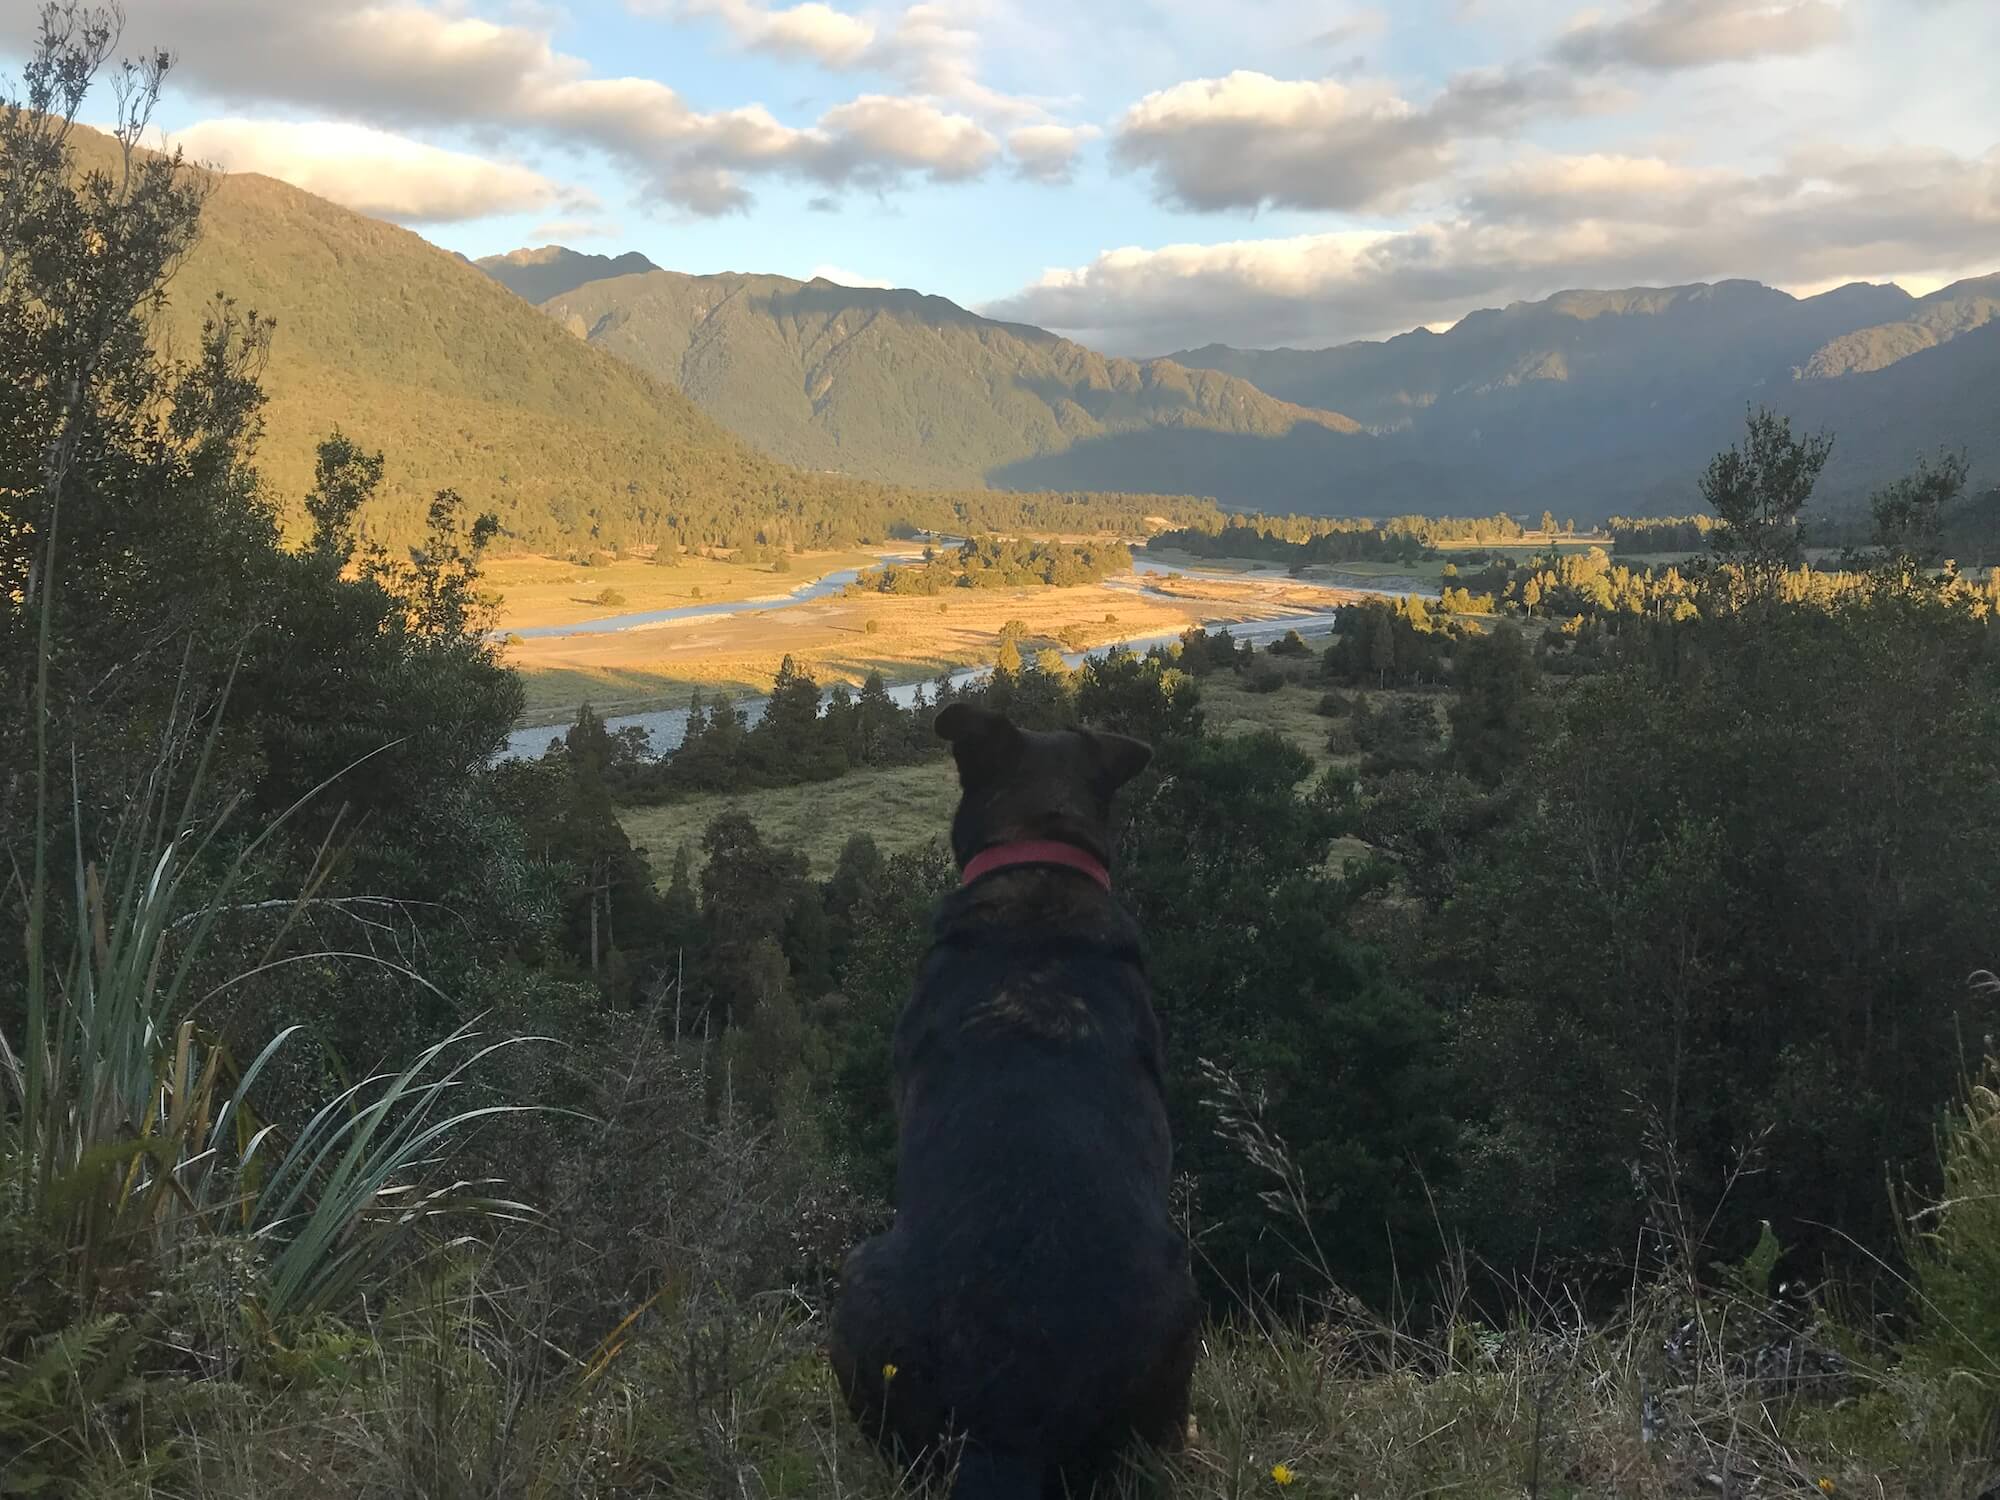 A black dog sitting on a hill overlooking a river and mountains.